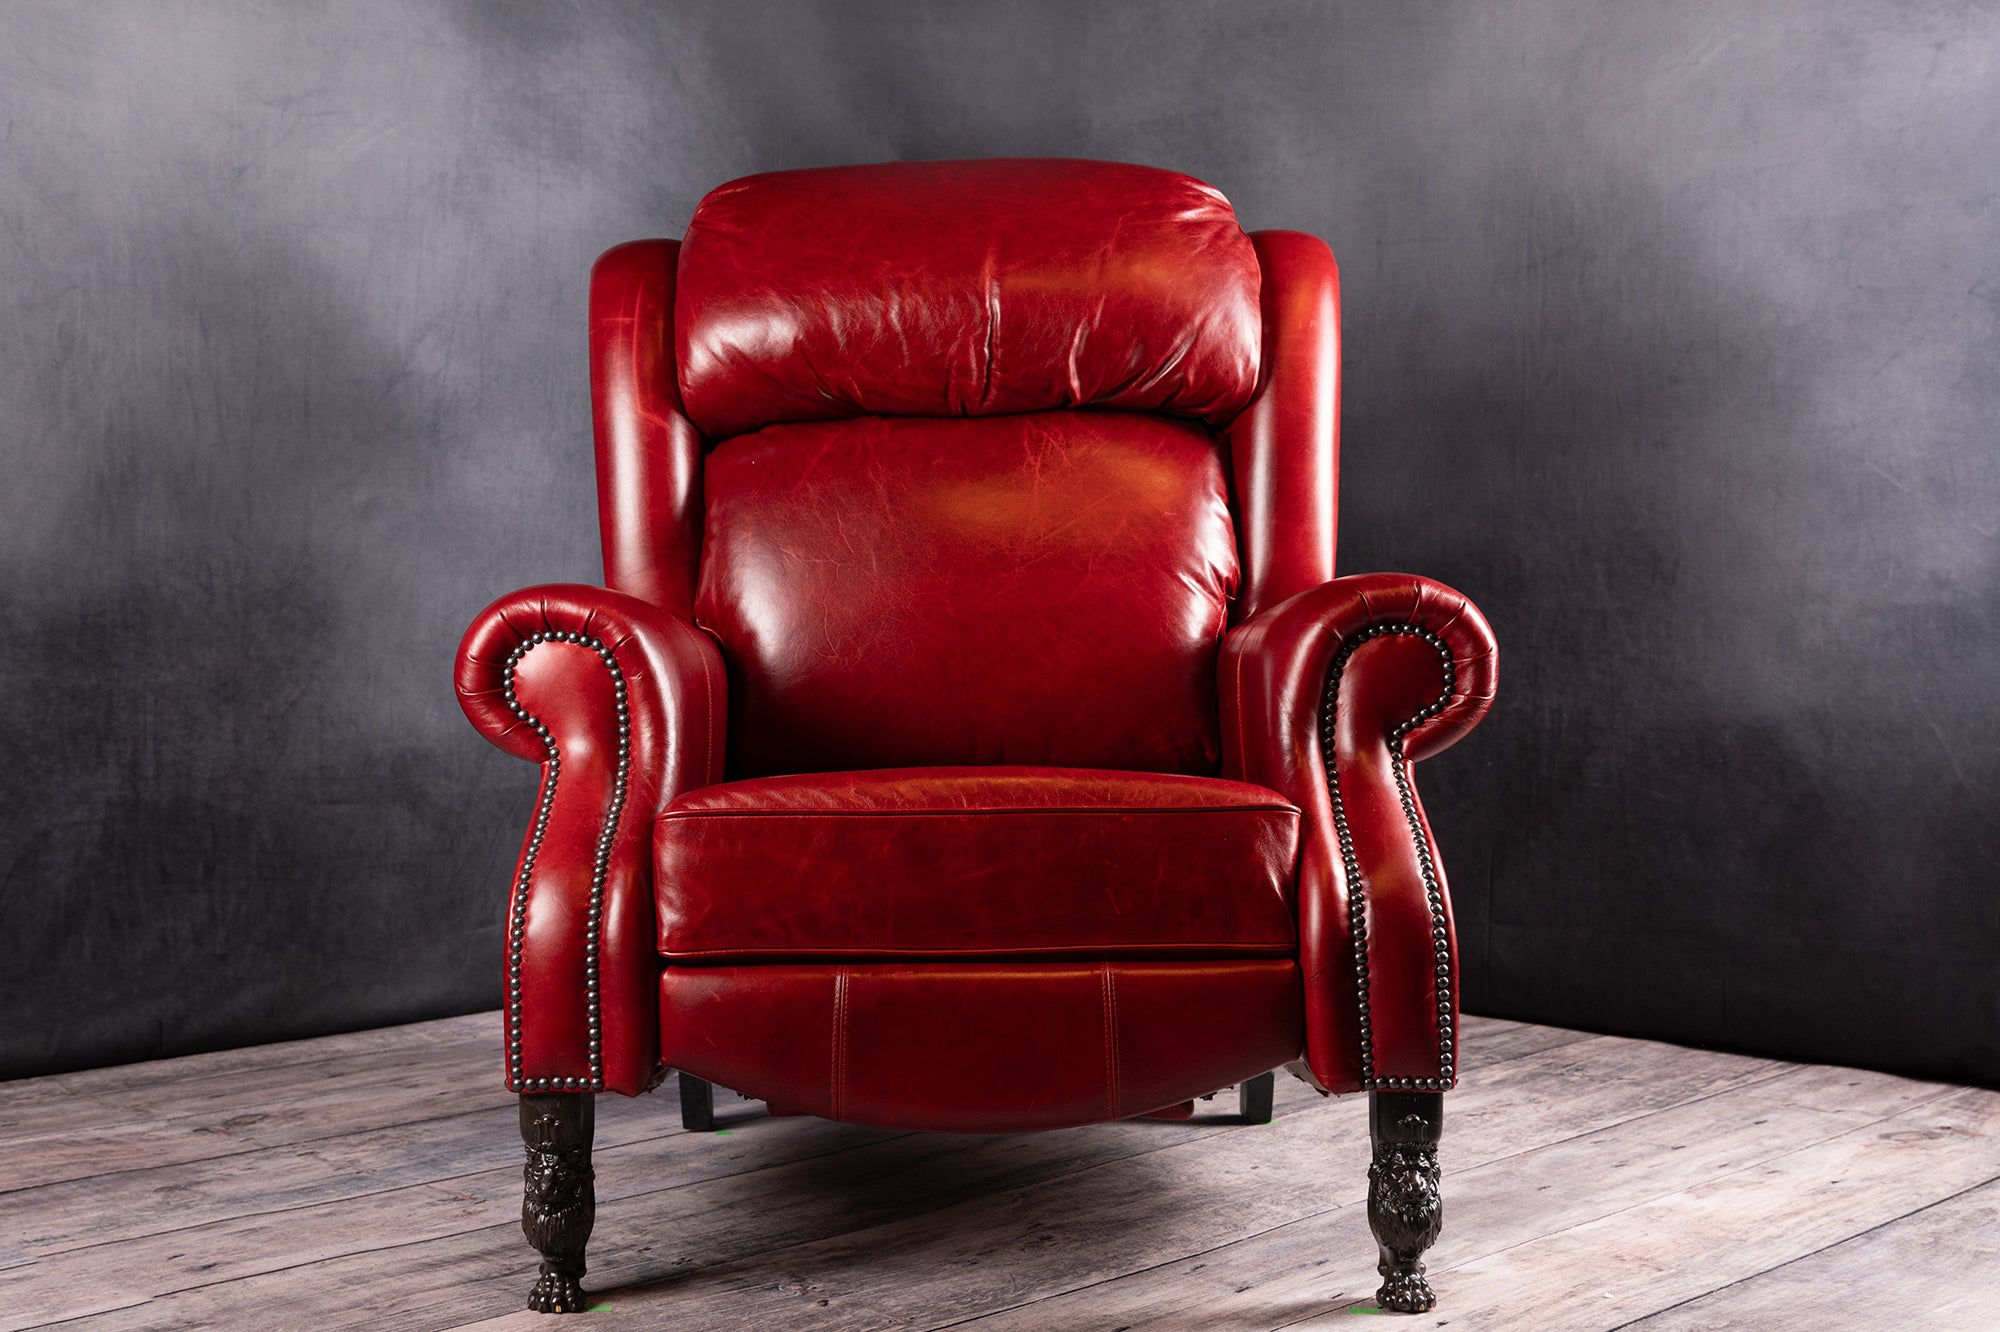 KING RECLINER RED CHAIR